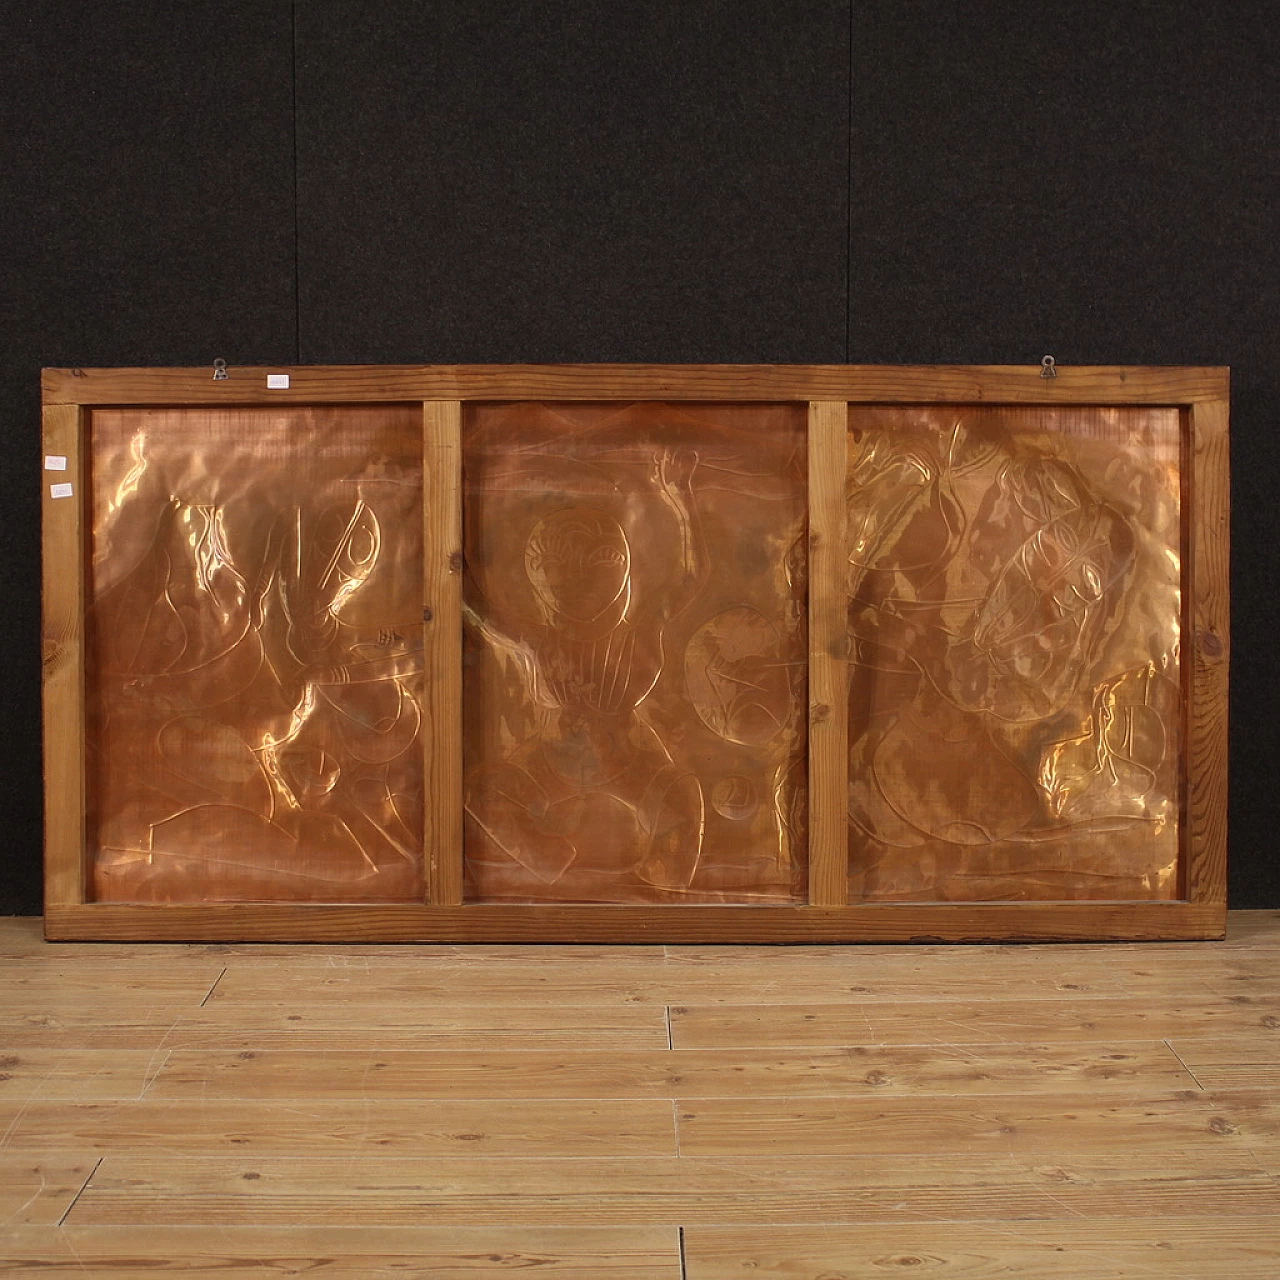 Embossed, chiselled and painted copper panel, 1981 6